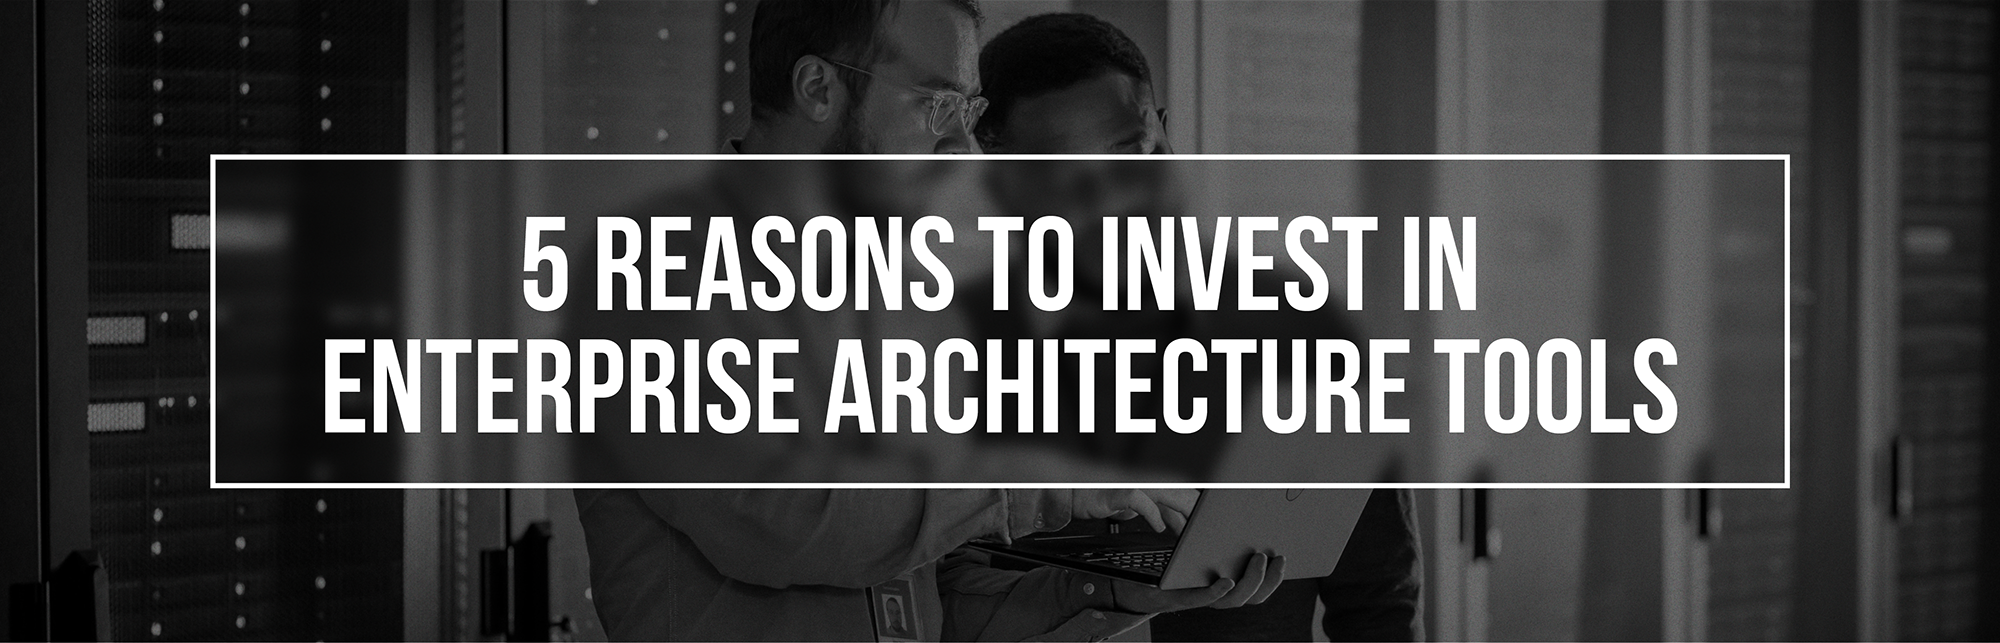 blog-5-Reasons-to-Invest-in-Enterprise-Architecture-Tools